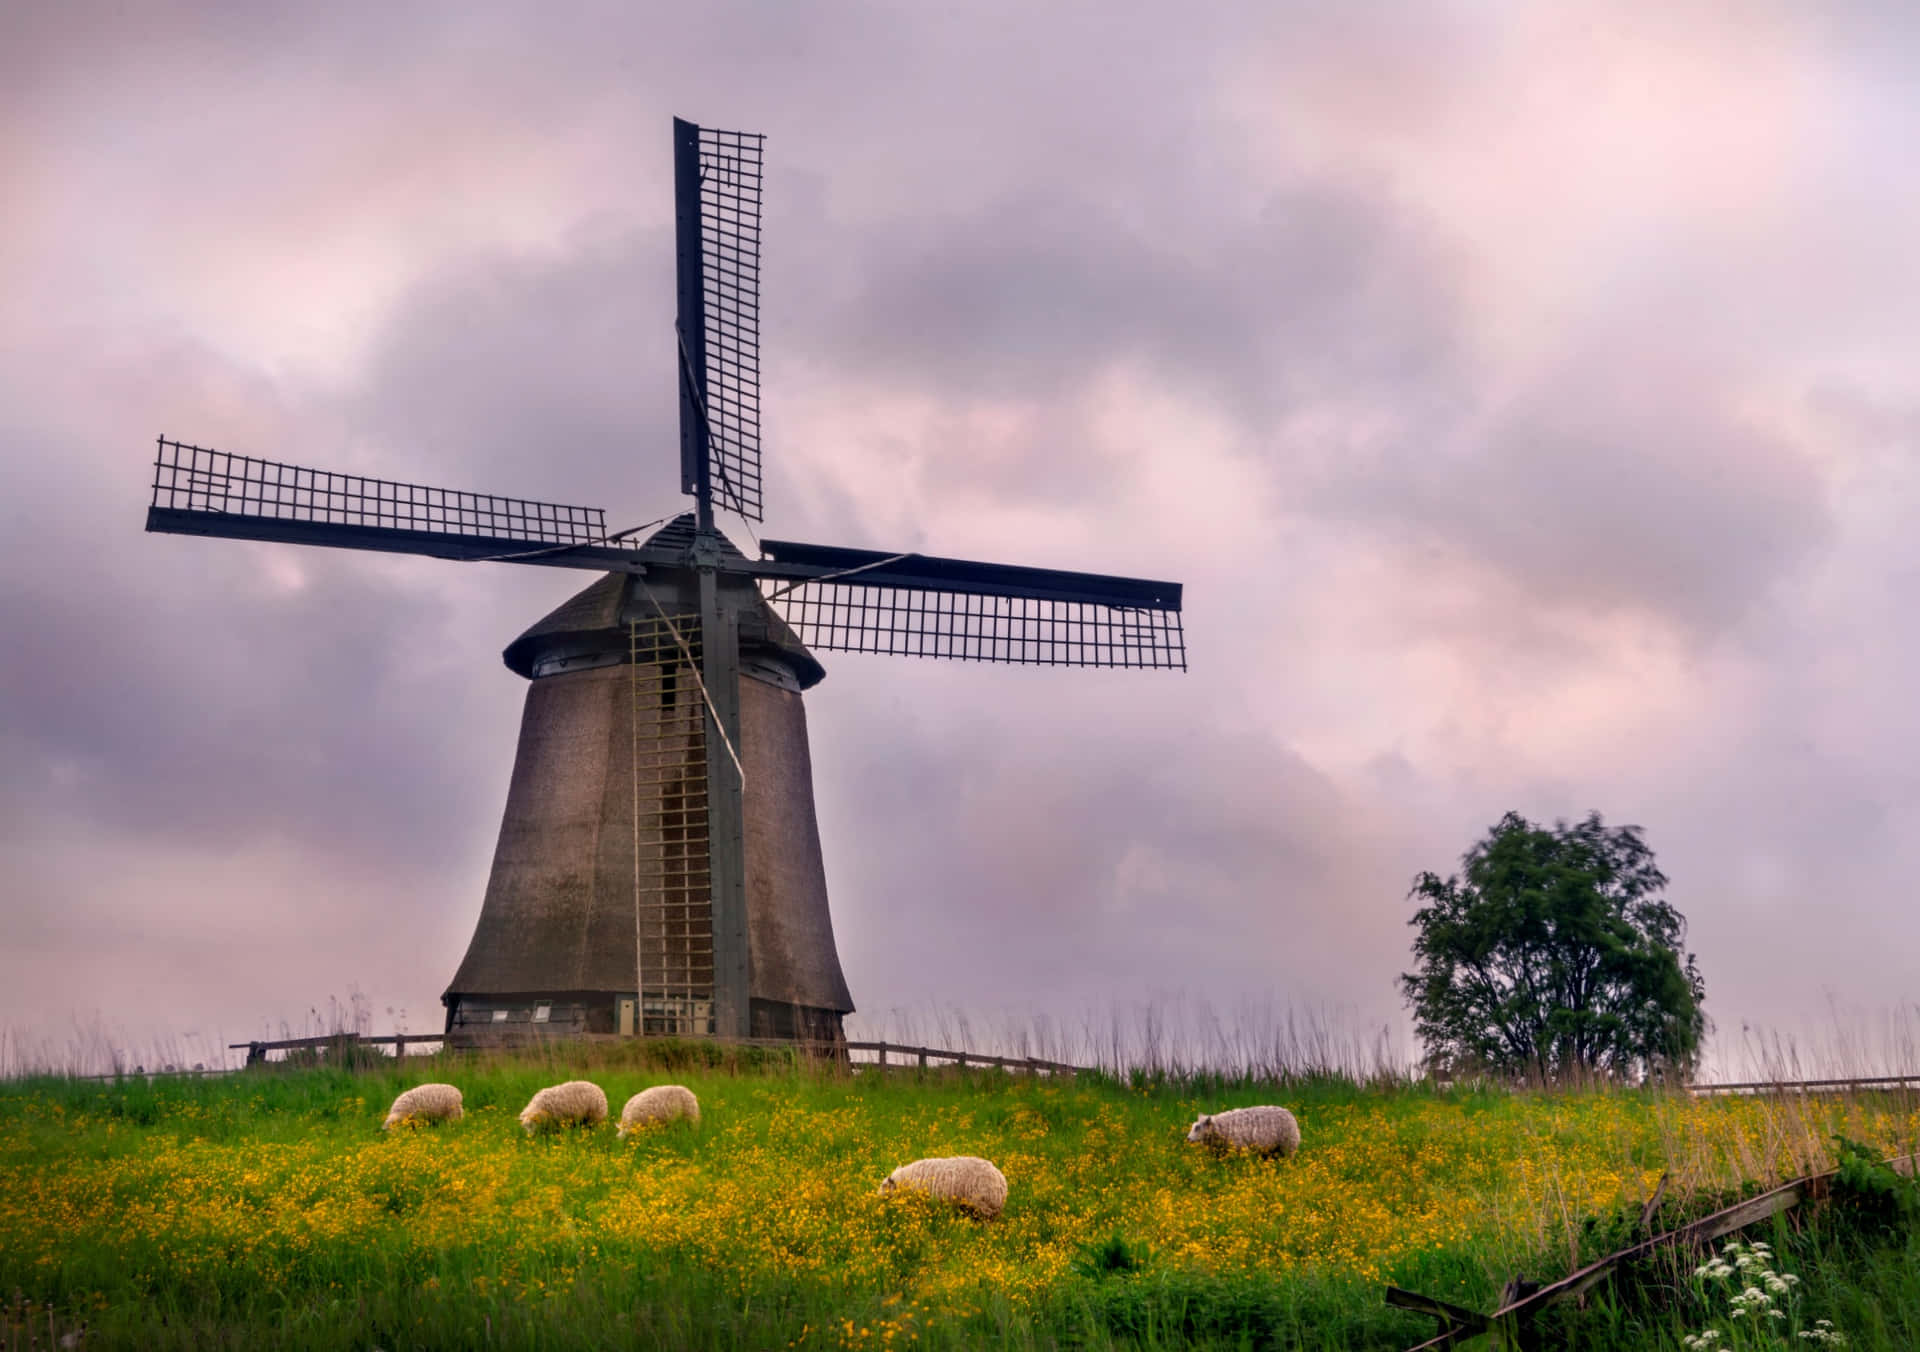 A Windmill With Sheep Grazing In The Field